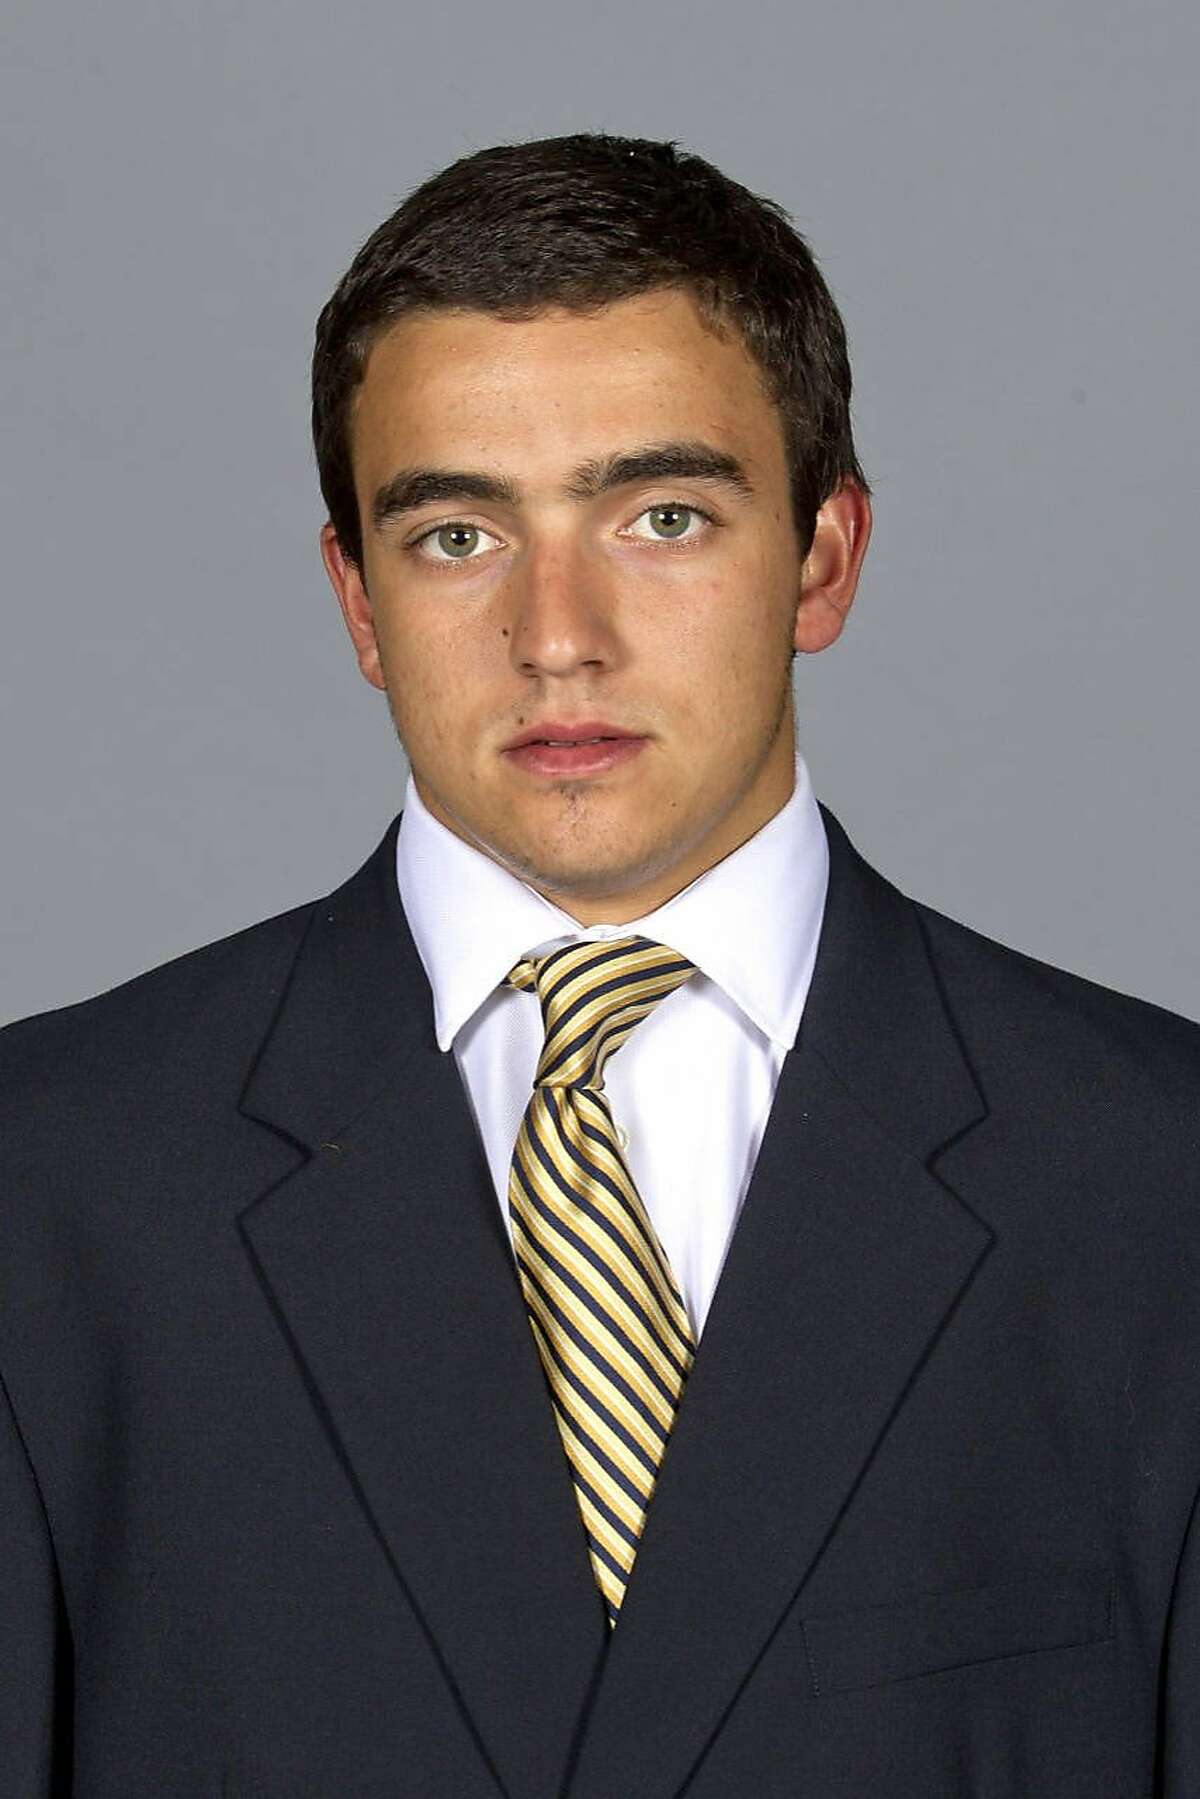 Fabiano Hale, a Cal freshman running back, is seen in here in an undated roster photo. Hale was allegedly assaulted by a fellow teamate, according to UC Berkeley Police.